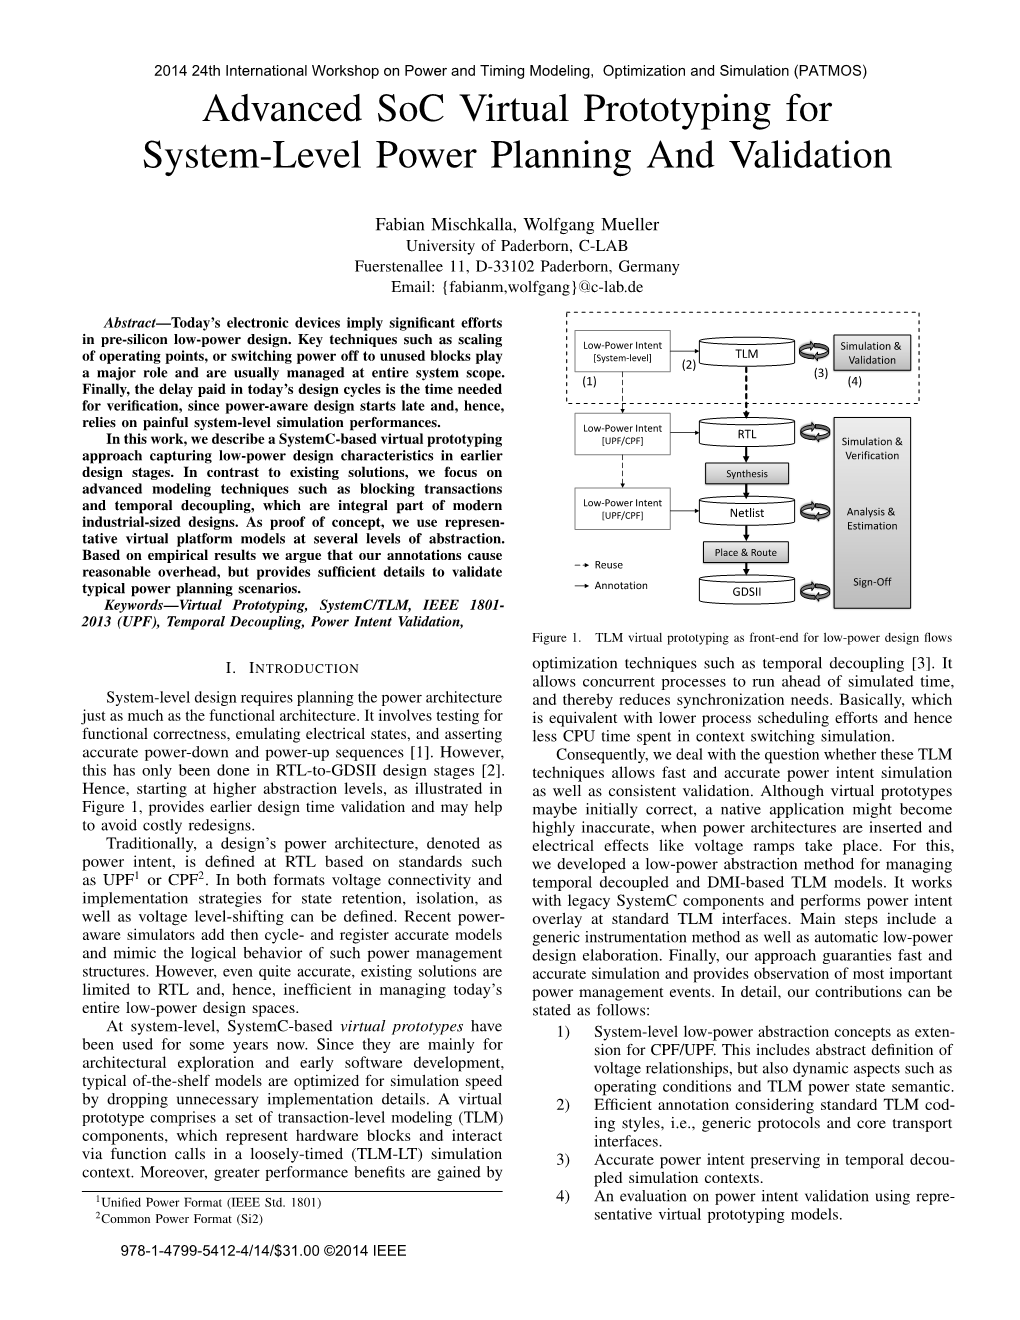 Advanced Soc Virtual Prototyping for System-Level Power Planning and Validation